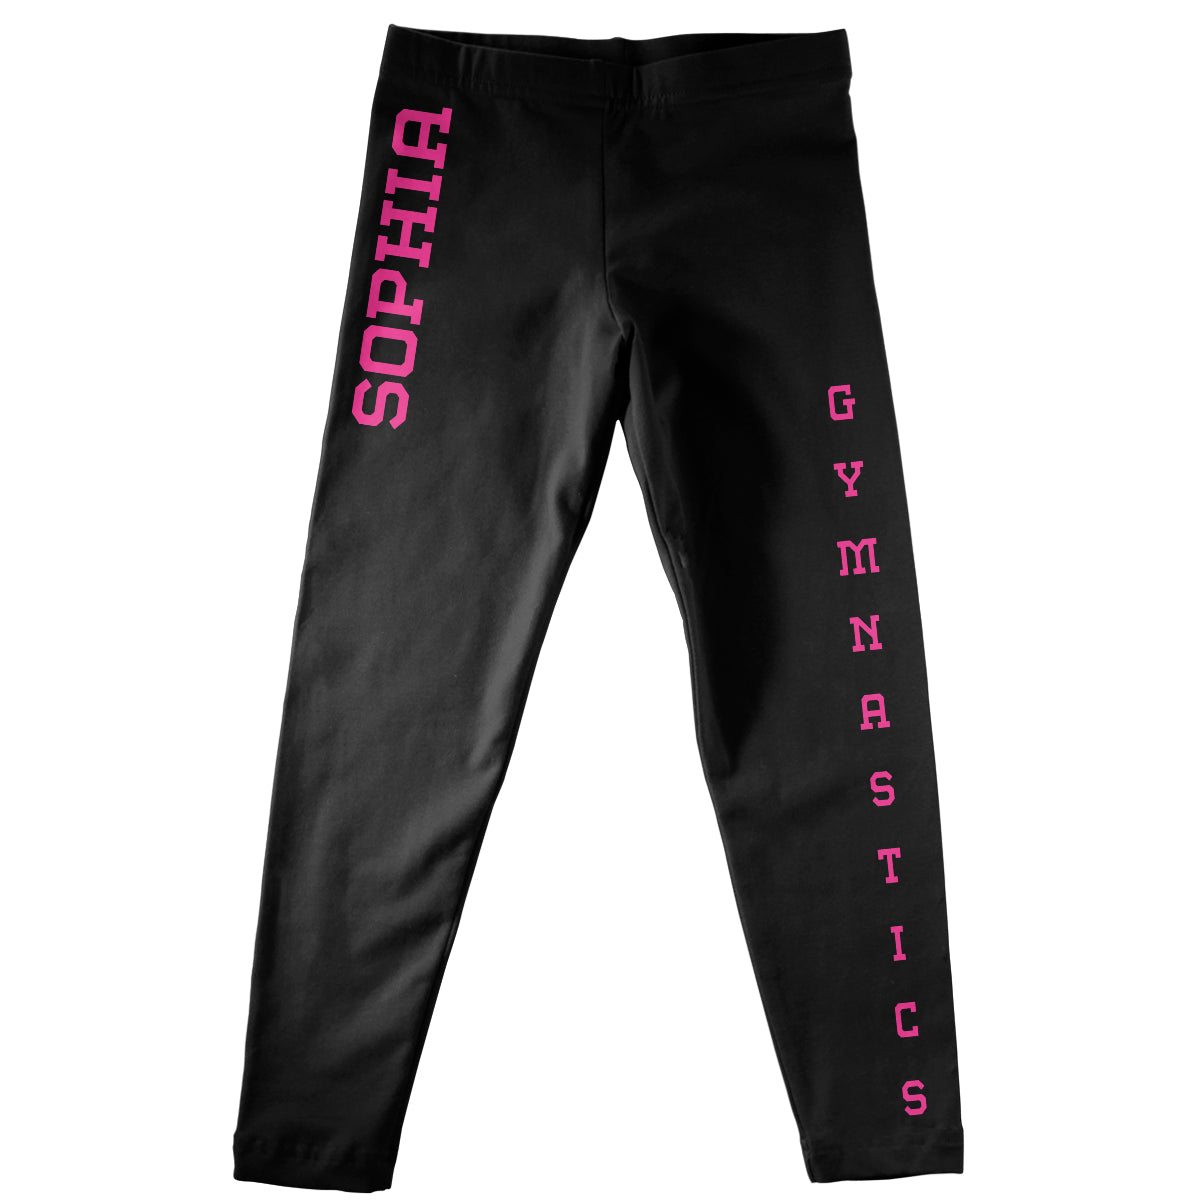 Black and pink gymnastics girls leggings with name - Wimziy&Co.